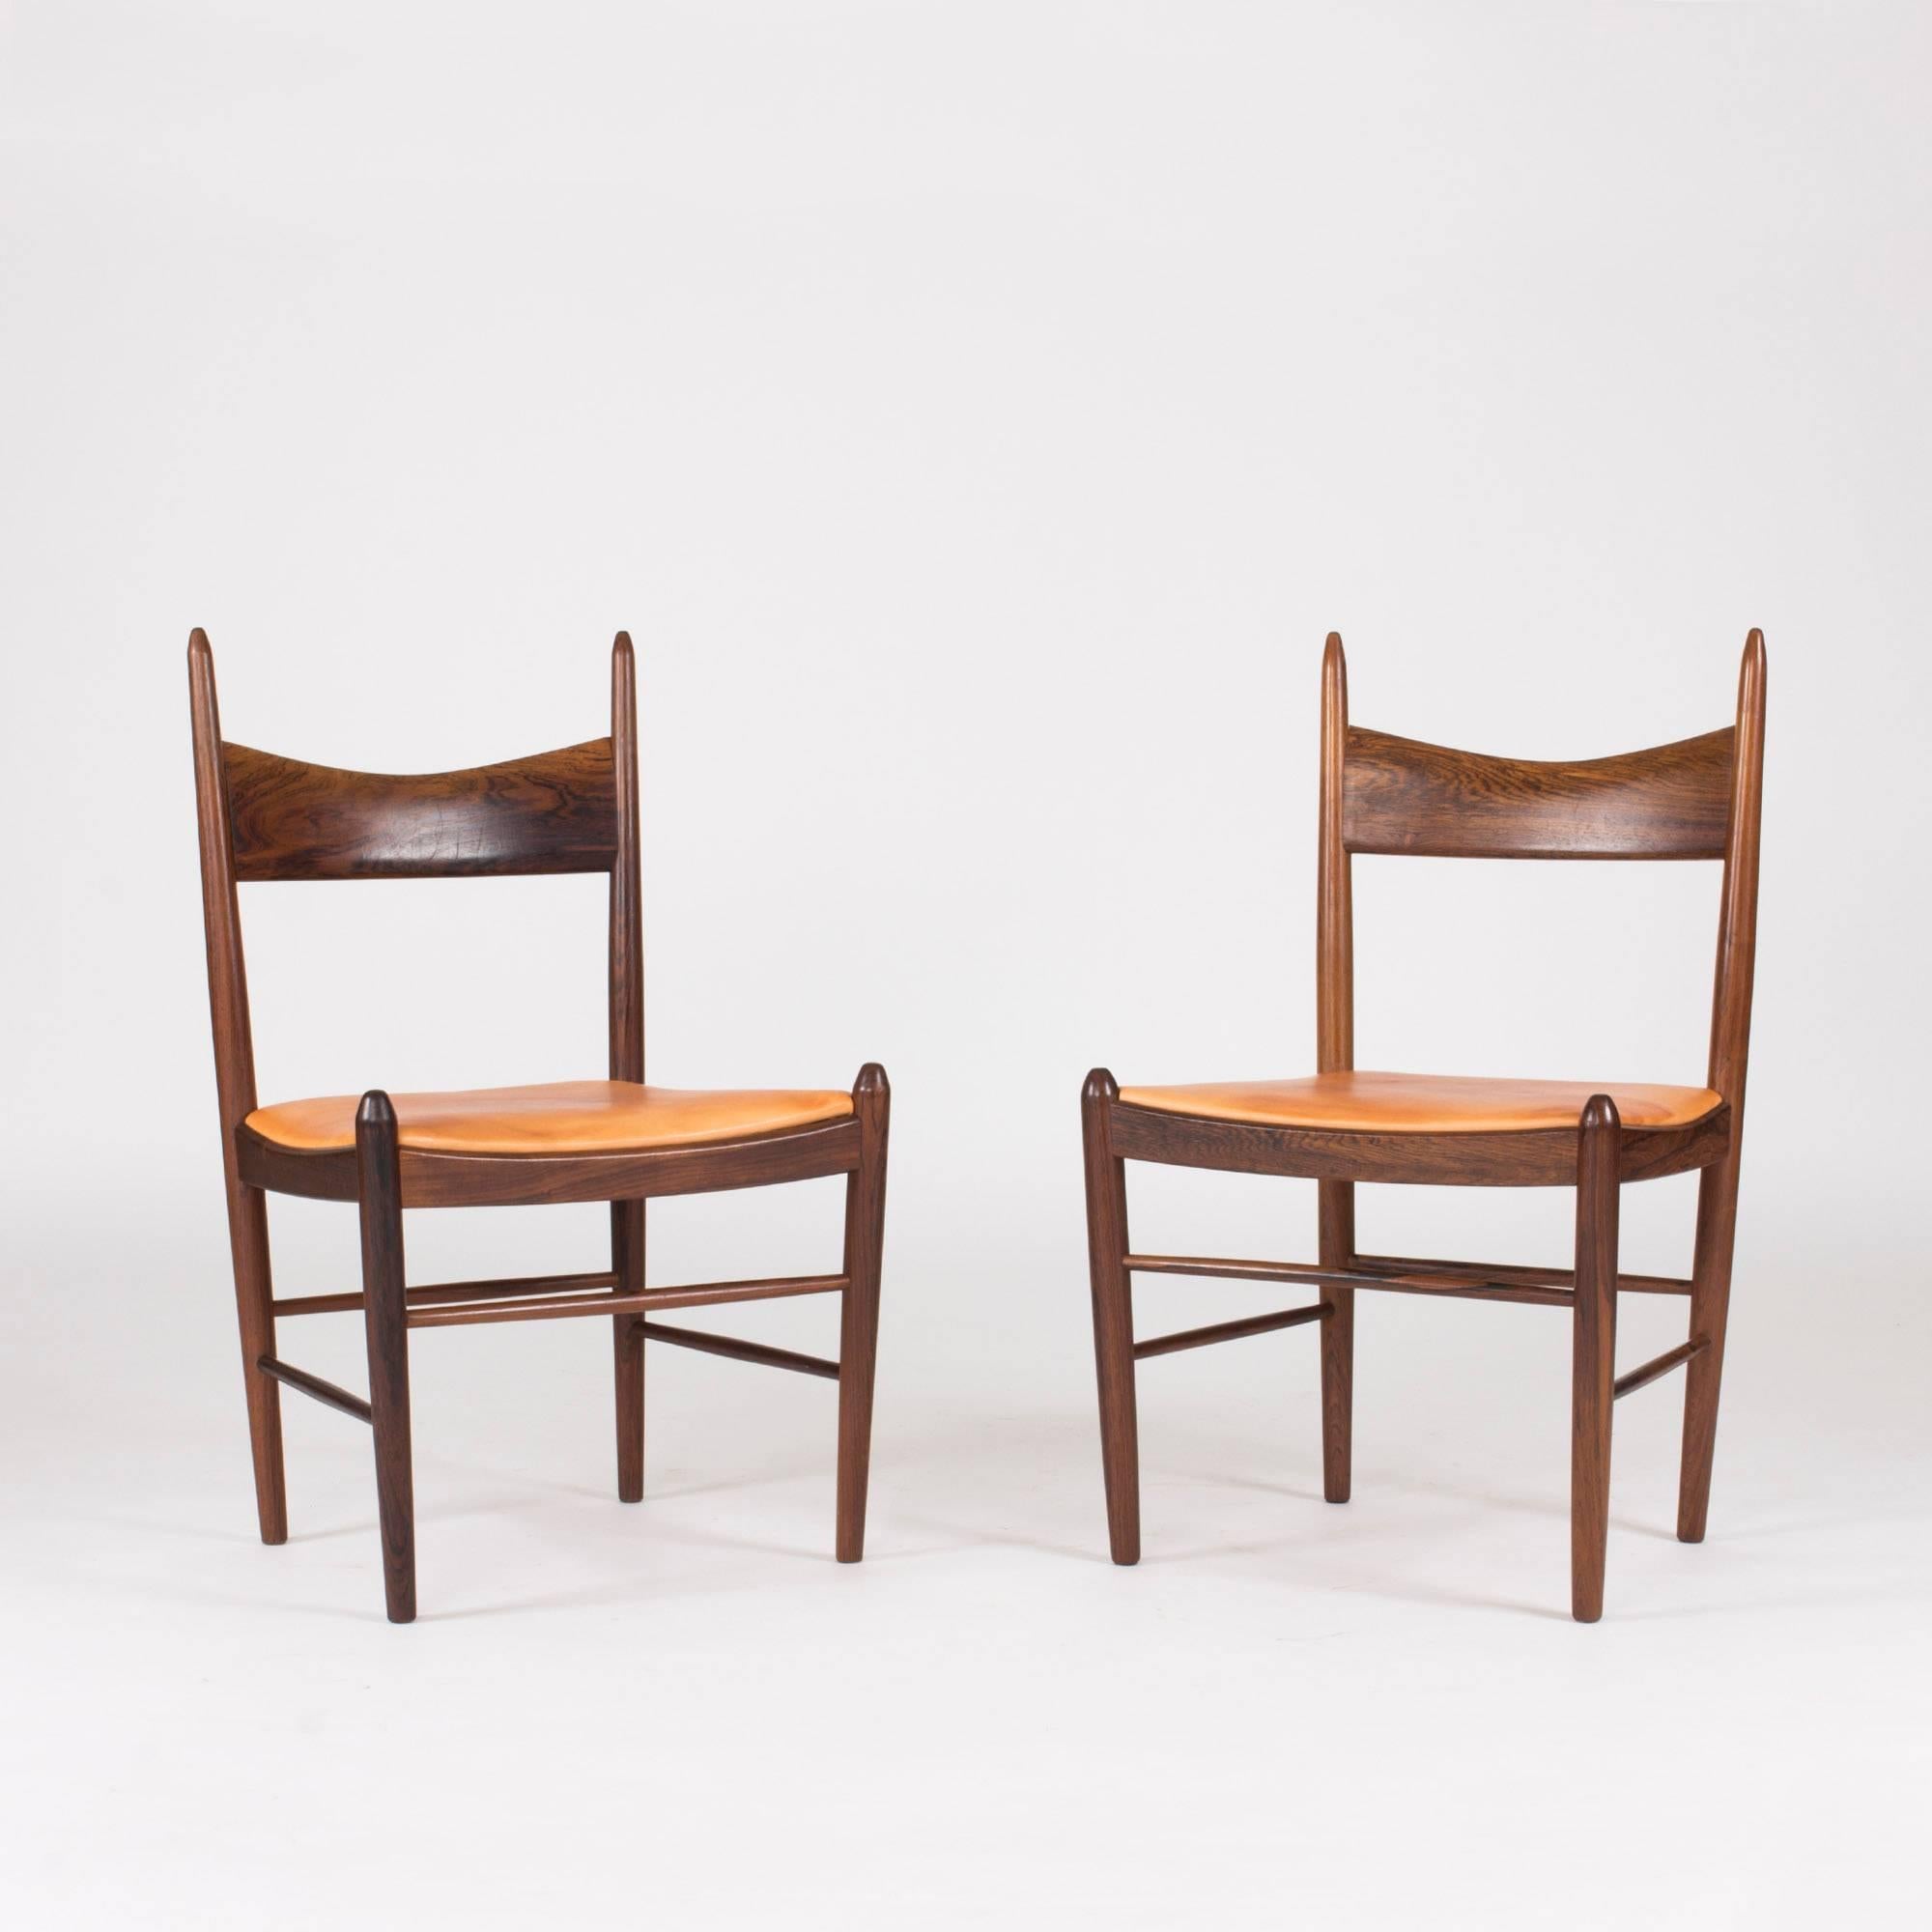 Set of ten stunning rosewood dining chairs in a bold design by H. Vestervig Eriksen, executed in beautiful rosewood and luxurious nude leather. The wood grain and nuance vary subtly between the chairs, emphasizing the craftsmanship in the making of